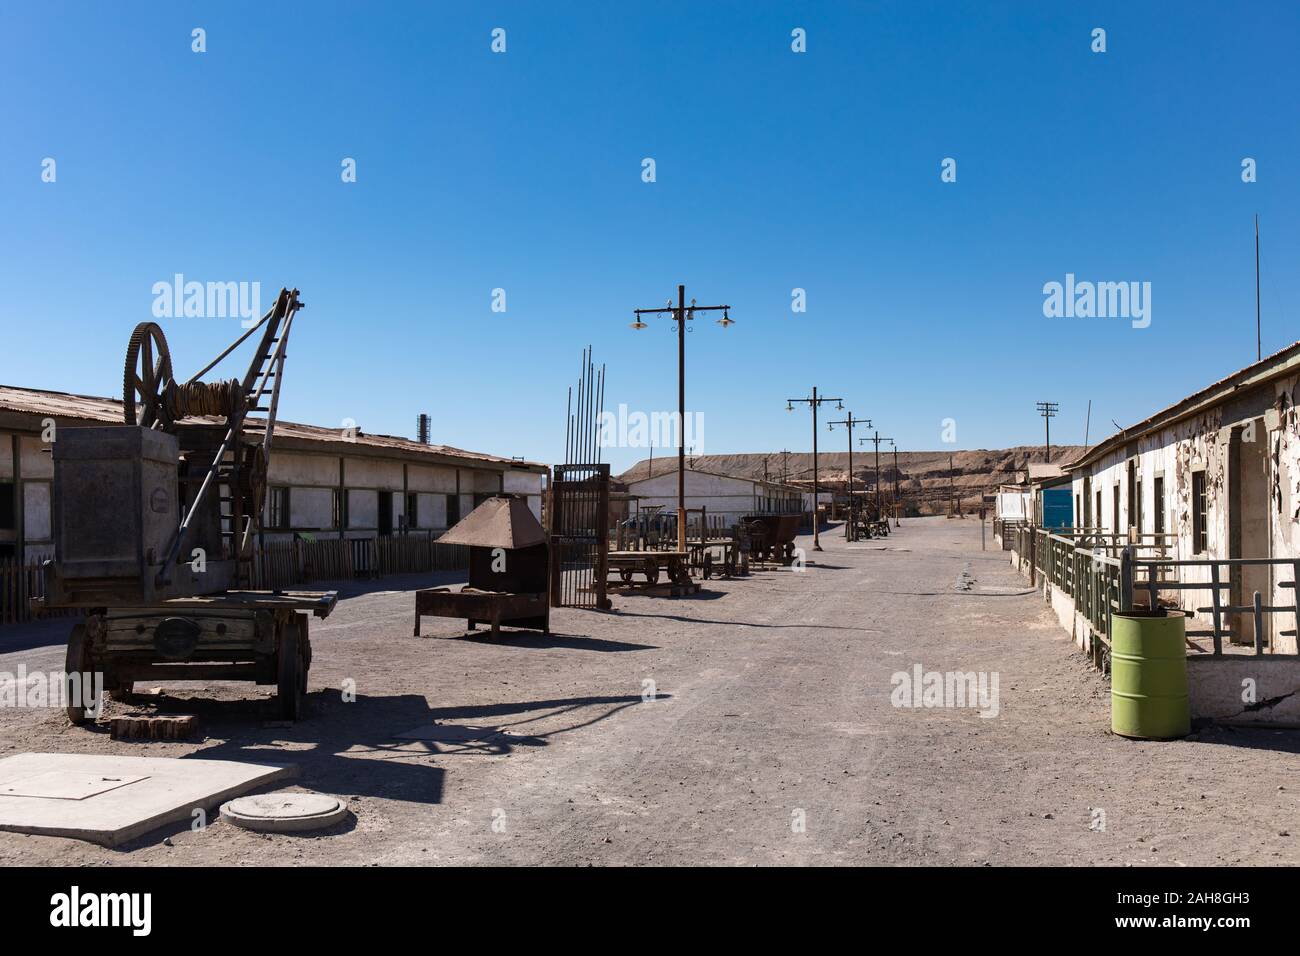 Machinery on display in a street in the residential area of the abandoned Humberstone Saltpeter factory in the Atacama Desert, Northern Chile Stock Photo